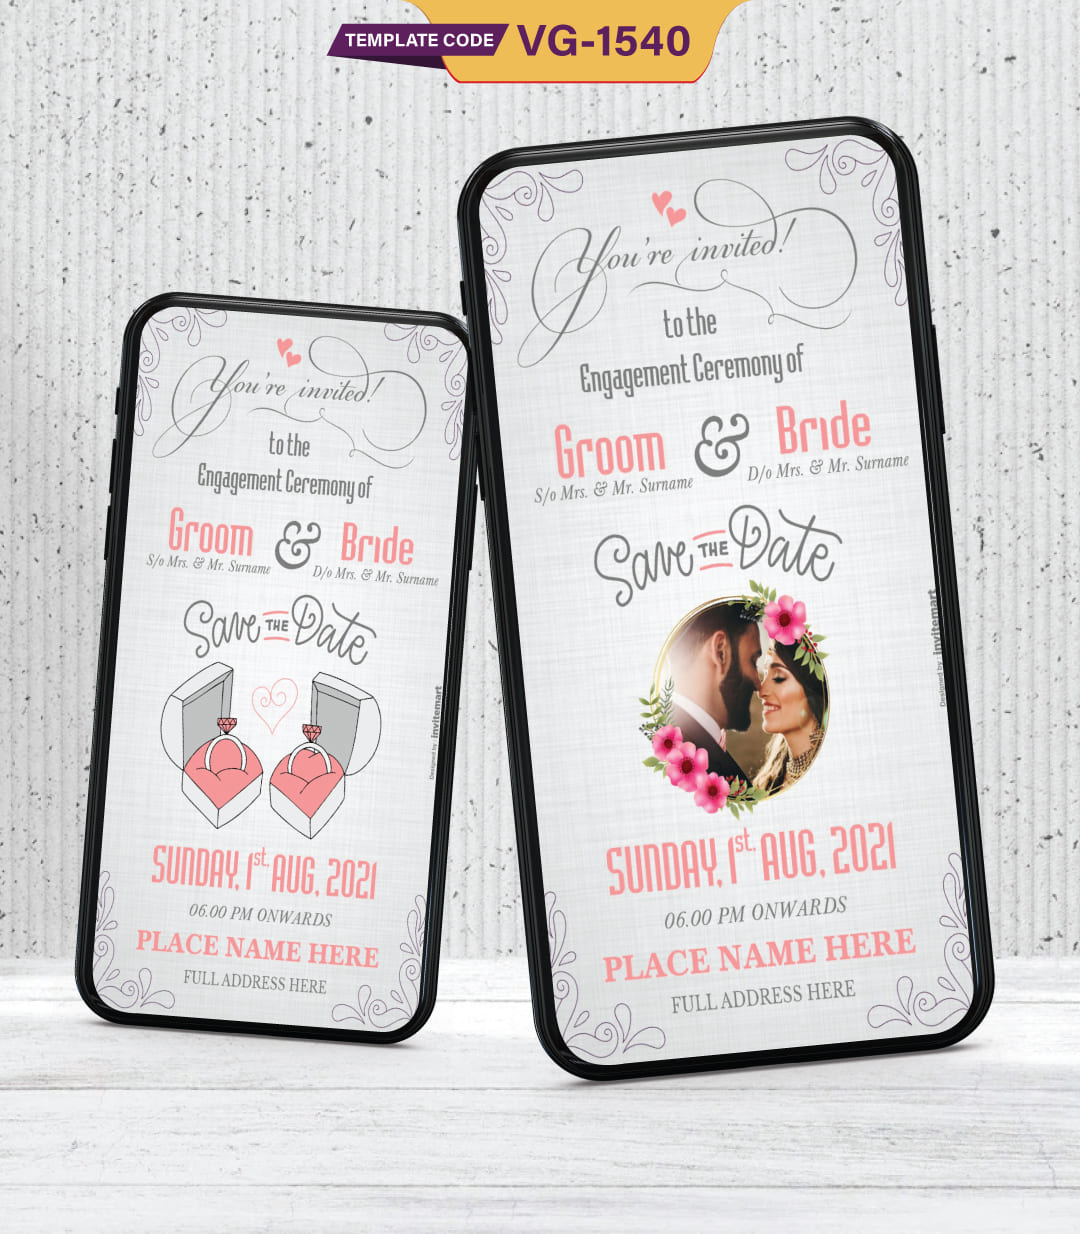 Save The Date Engagement Ceremony Invitation Card